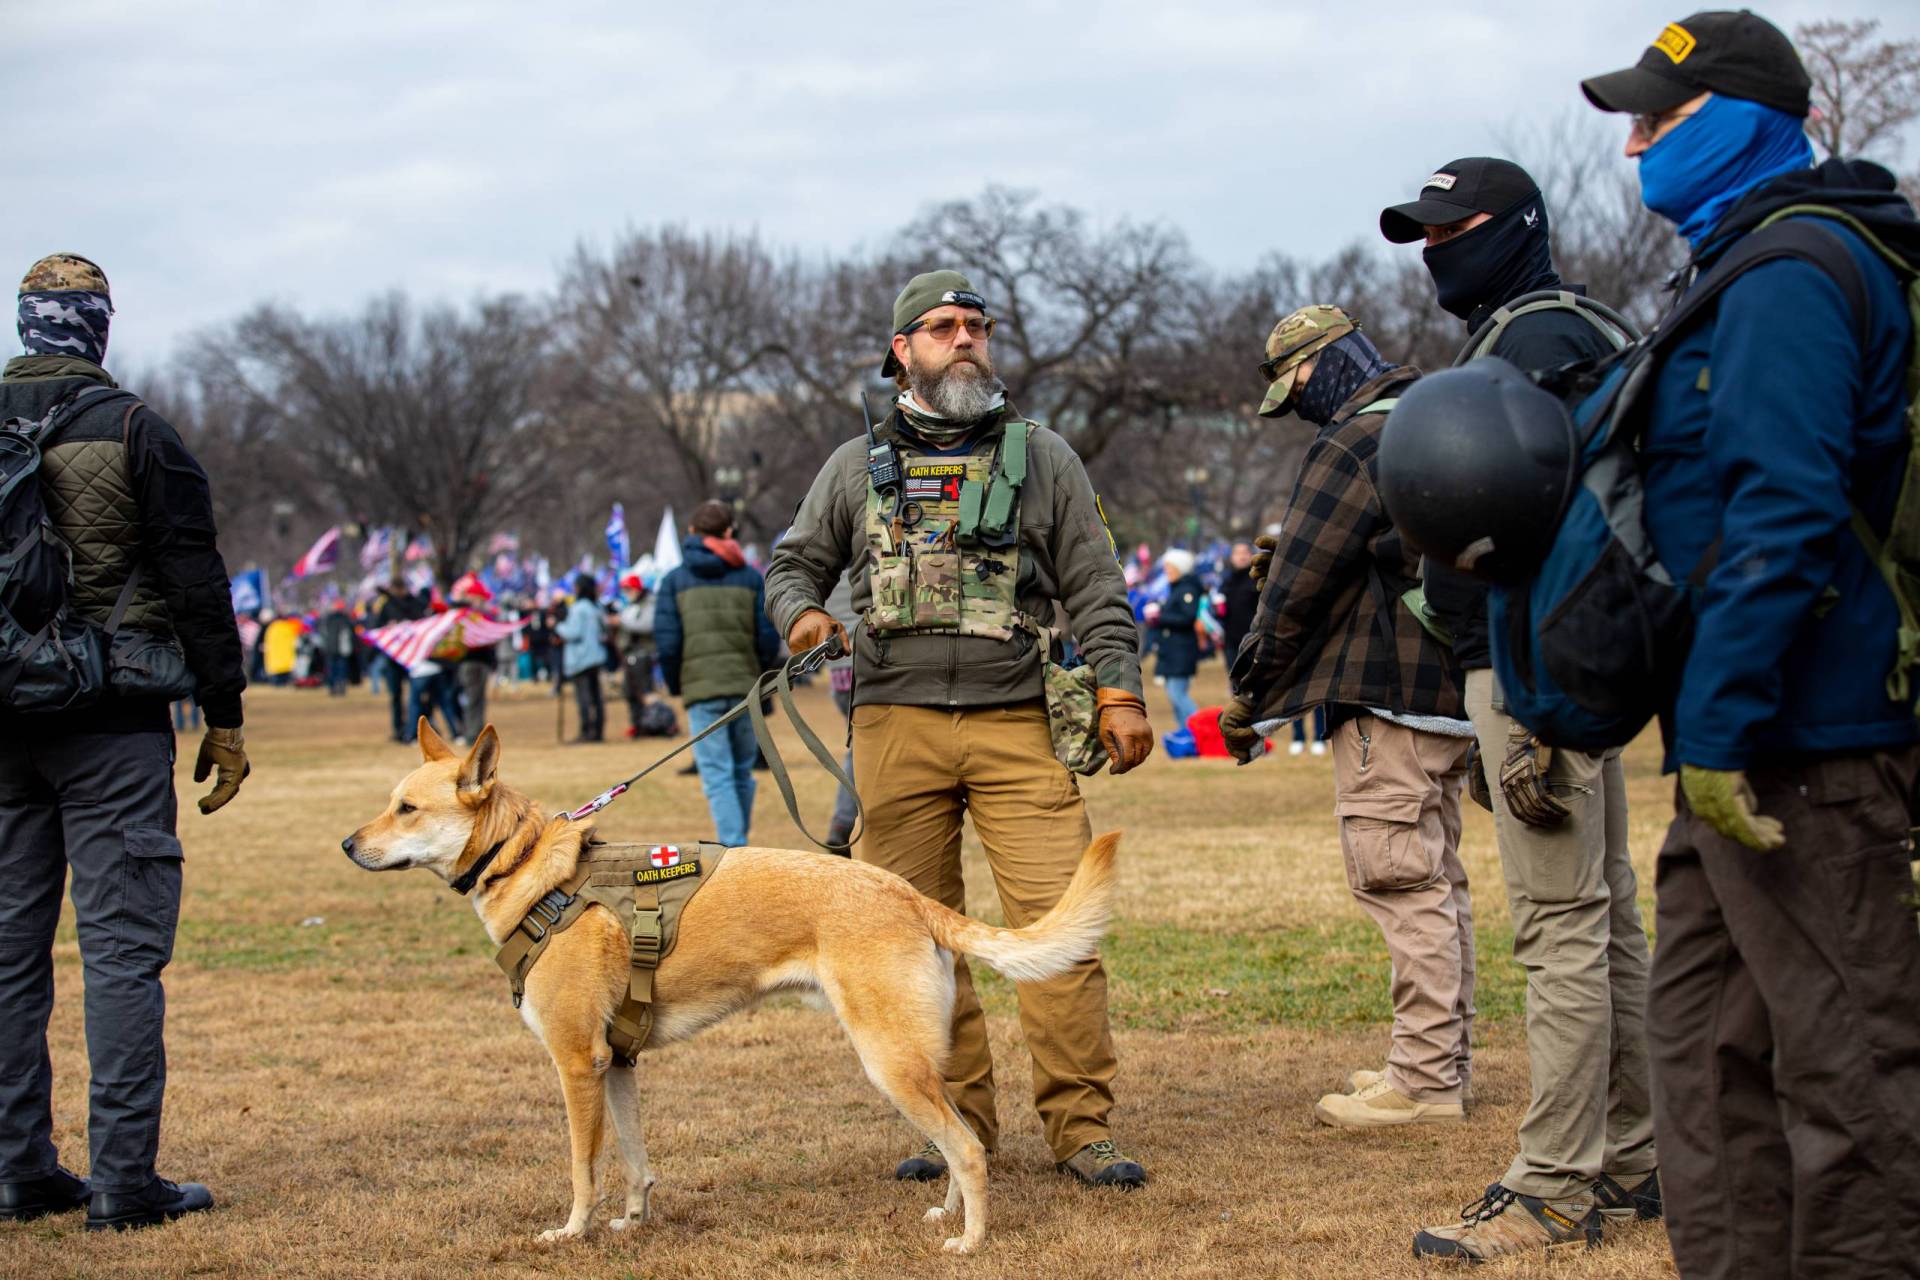 Men stand in a field of dry grass, barren trees in the background, wearing long sleeves, pants, gloves, baseball caps, and cloth masks that cover most of their faces. One with a long beard and glasses holds a dog with a camo harness that has a red cross on it, like a medic's cross.